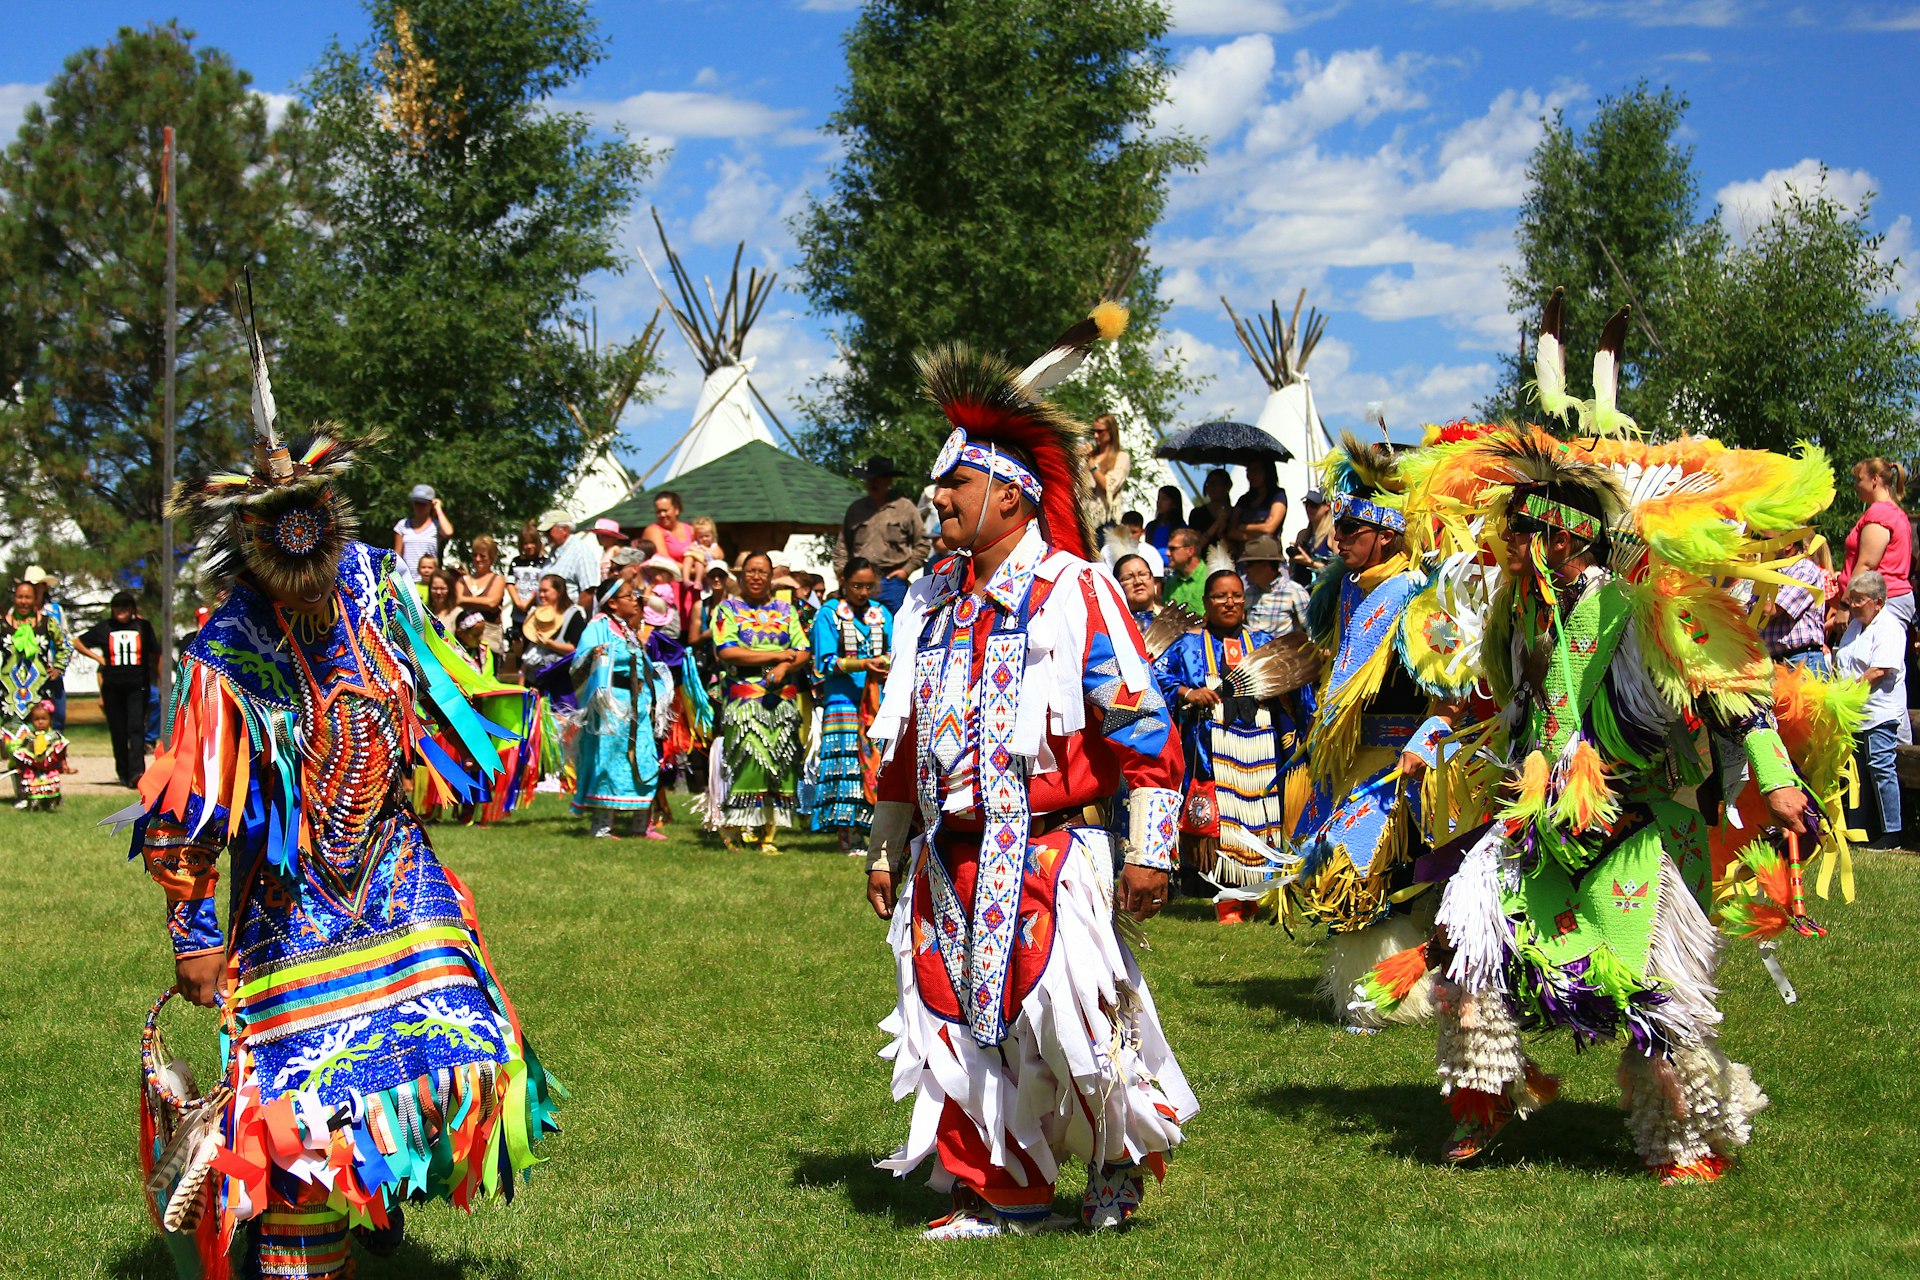 Native American performers in costume dance at a pow-wow.